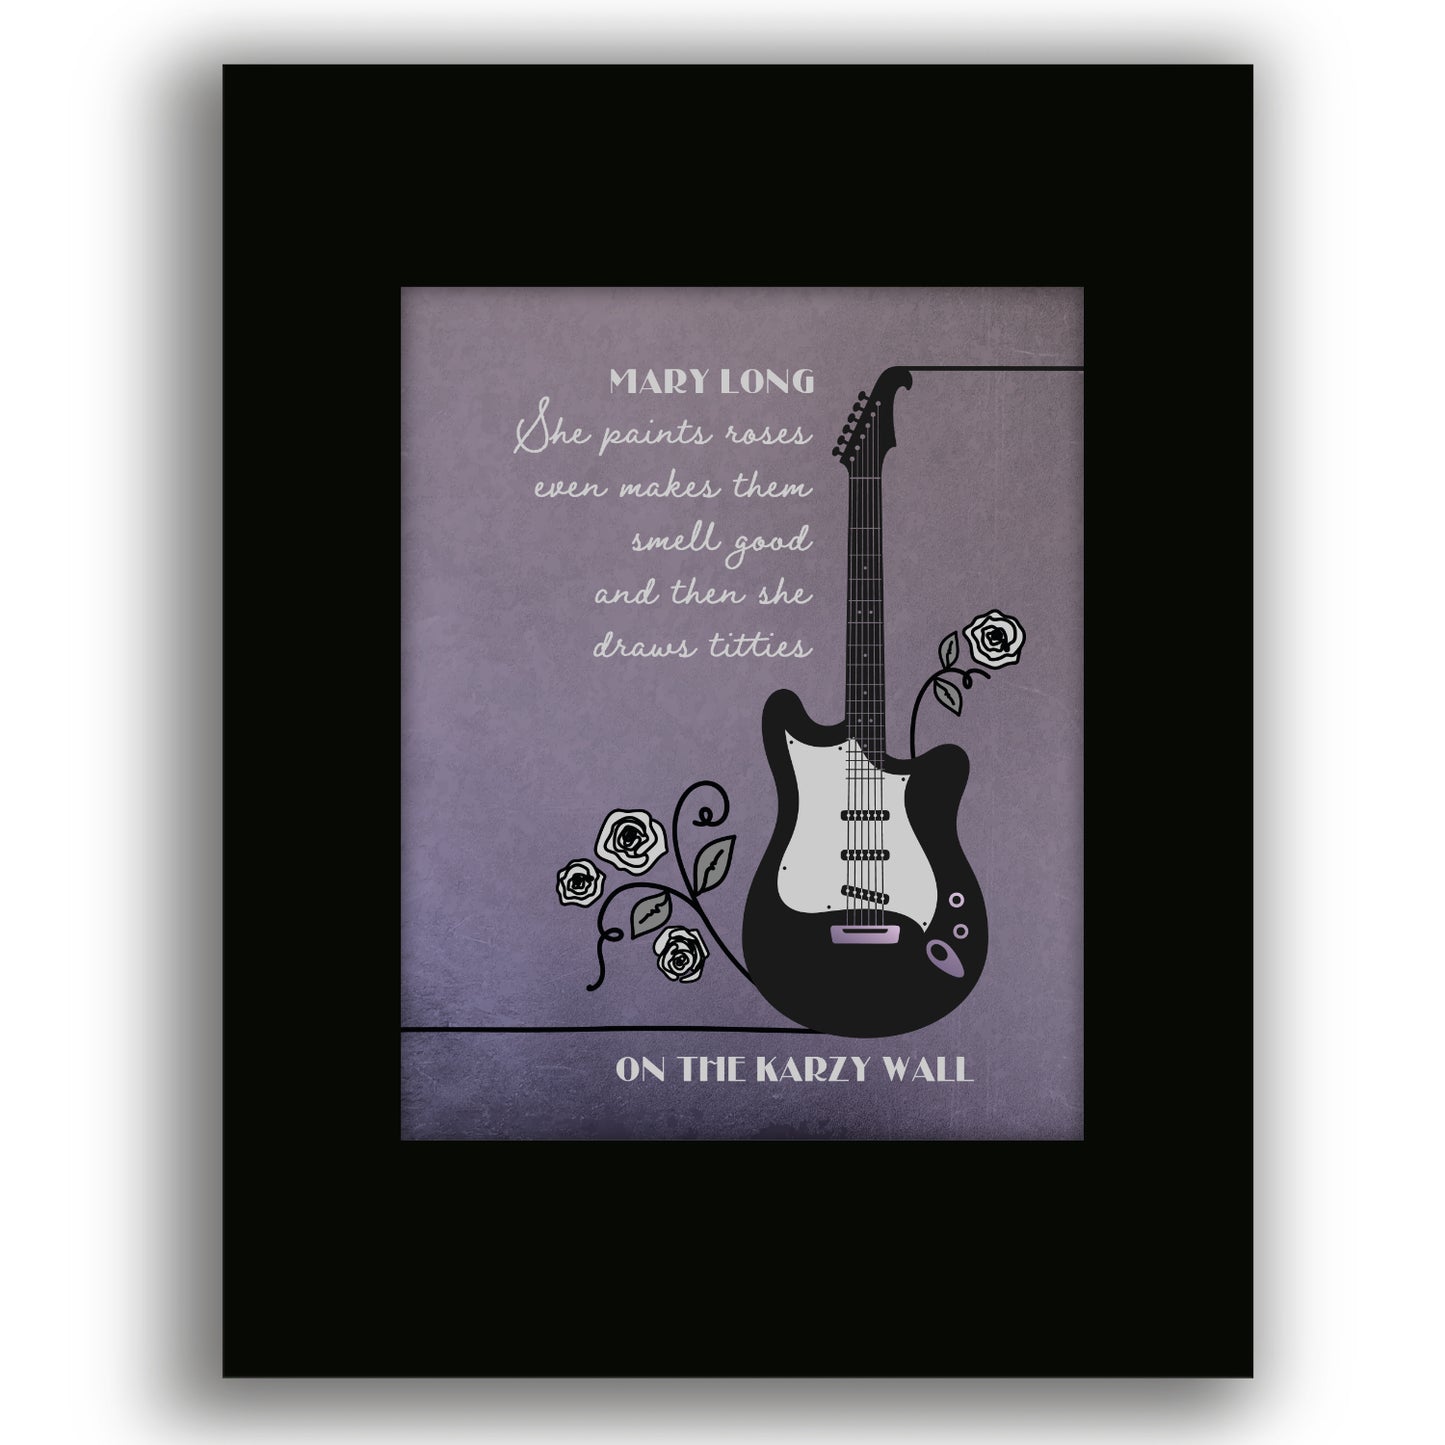 Mary Long by Deep Purple - Lyric Inspired Song Illustration Art Print